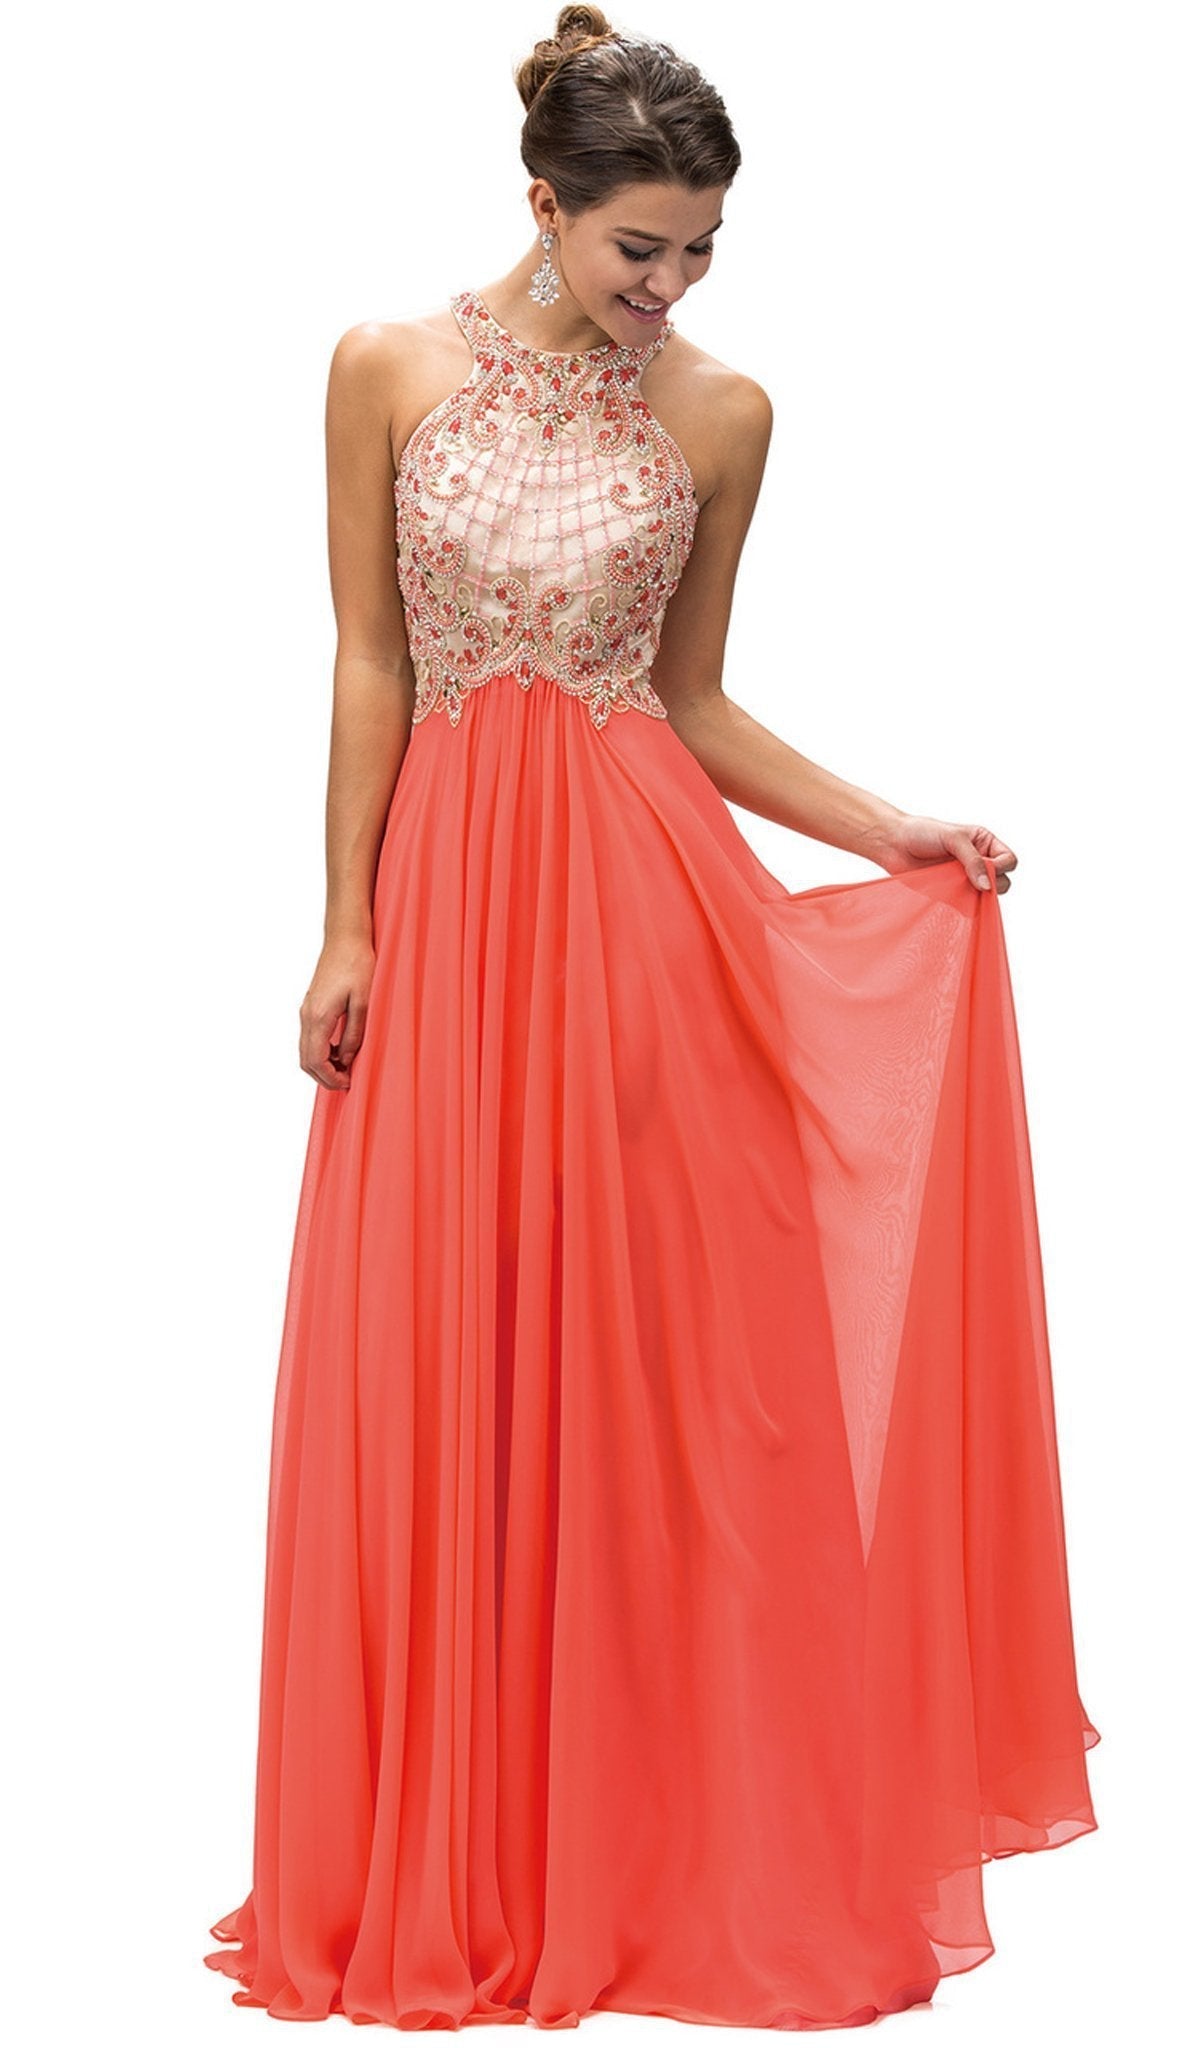 Dancing Queen - 9298 Embellished Halter A-line Evening Dress Special Occasion Dress XS / Coral